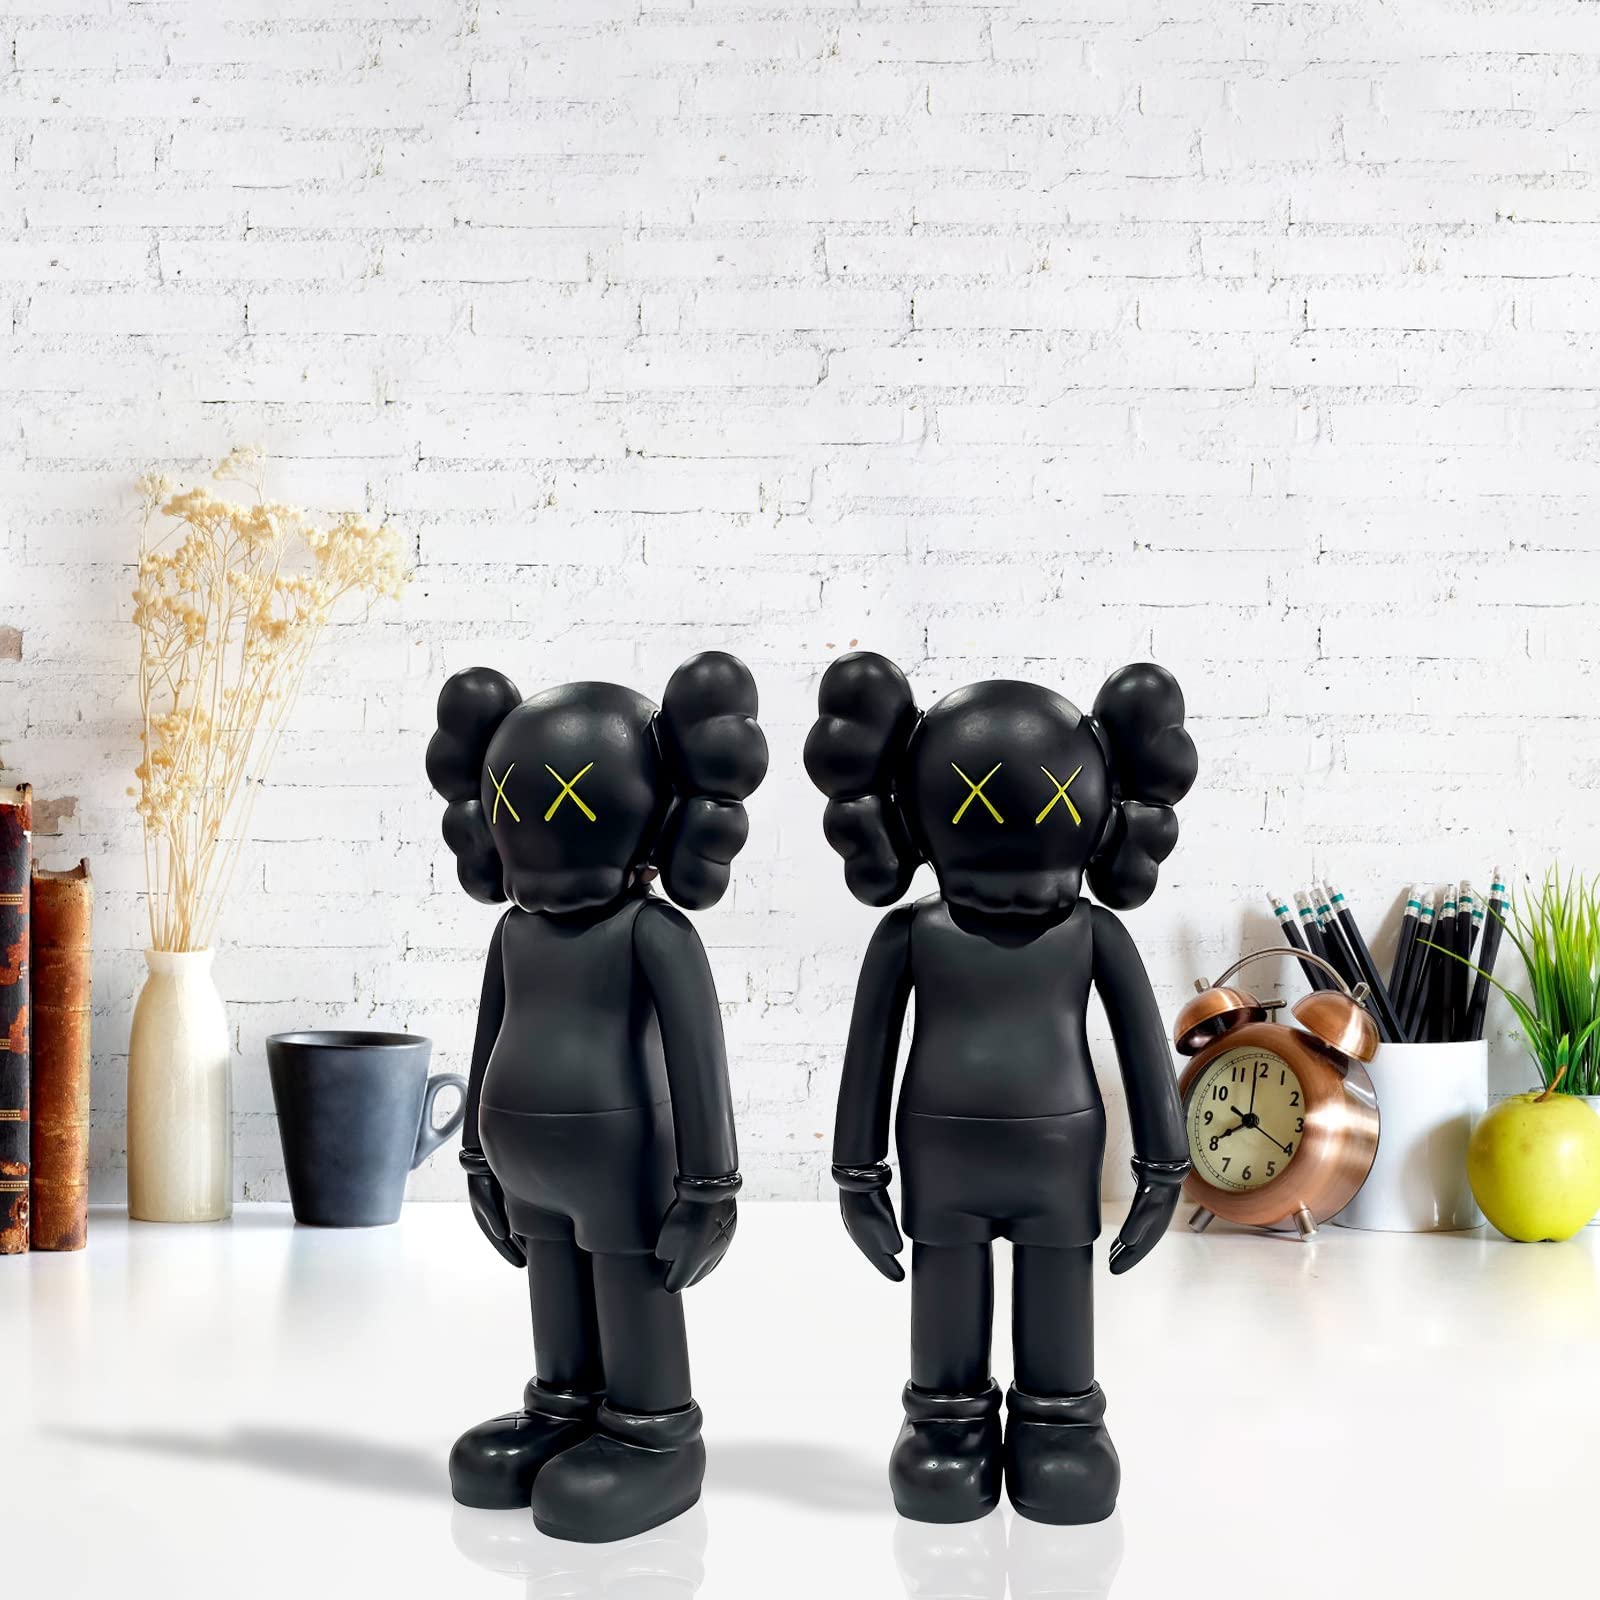 MECIKR 8 Inch KAWS Figure Model Art Action Figure, for Birthday Party Gifts,Christmas, Halloween, Life Decoration ,for Children and Adults